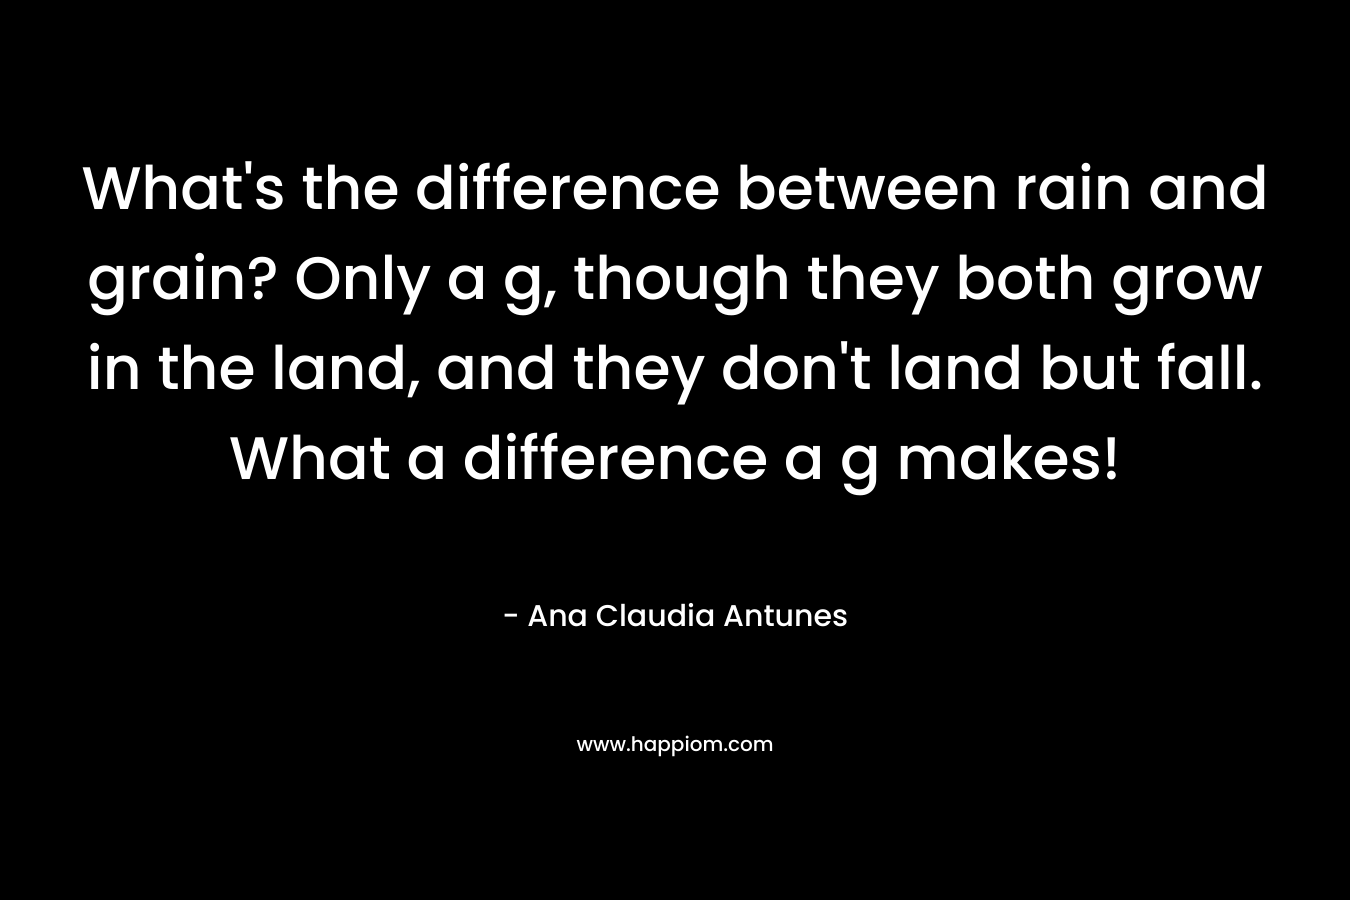 What’s the difference between rain and grain? Only a g, though they both grow in the land, and they don’t land but fall. What a difference a g makes! – Ana Claudia Antunes